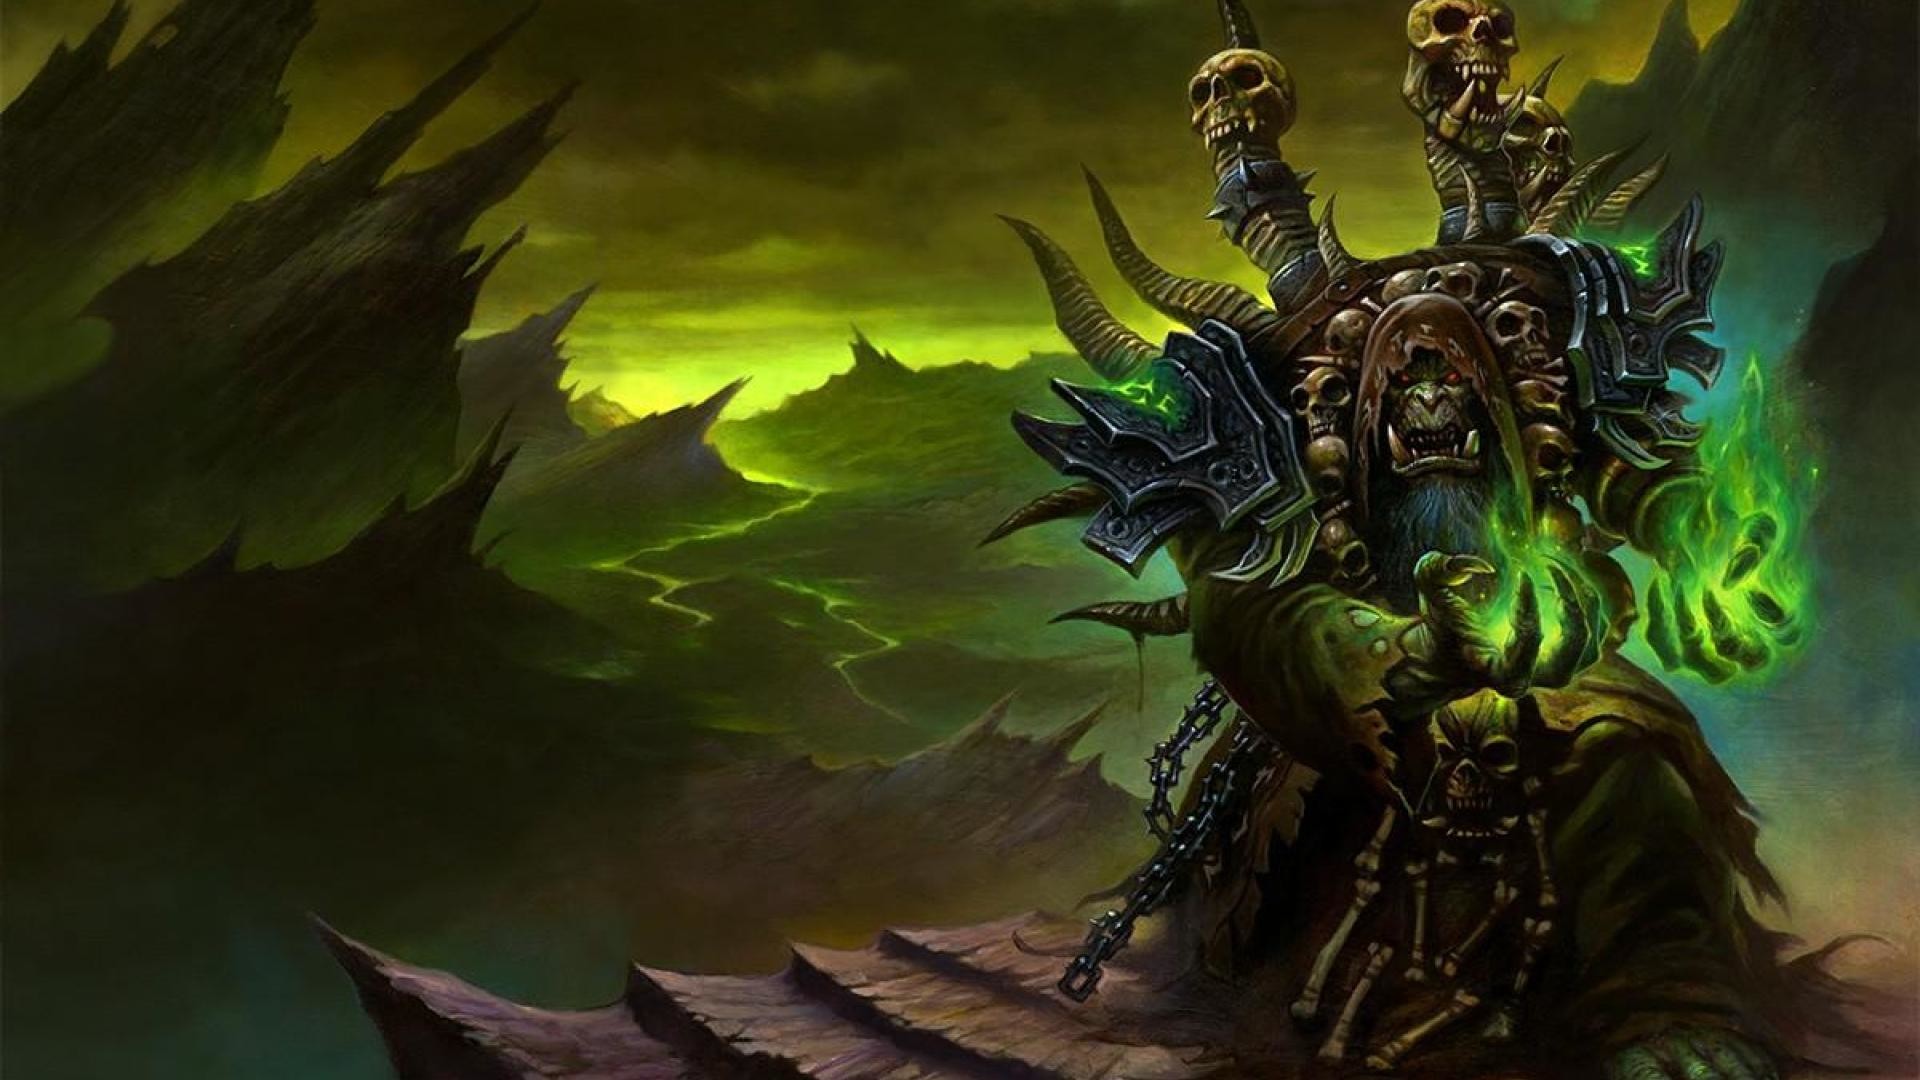 1920x1080 7. world-of-warcraft-wallpapers-HD7-600x338